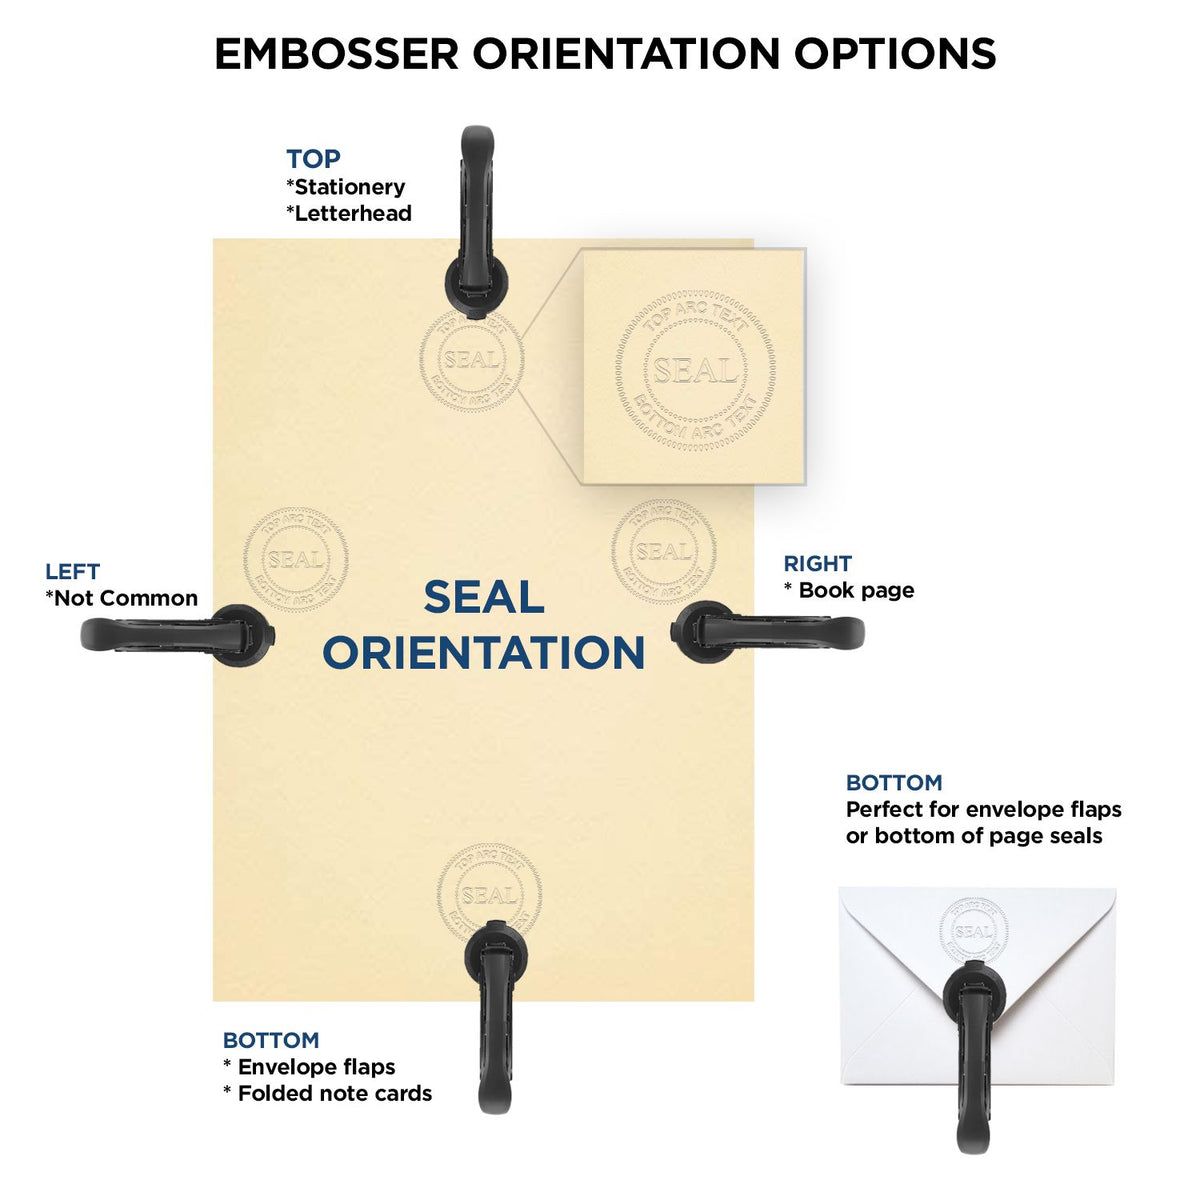 An infographic for the Handheld Tennessee Architect Seal Embosser showing embosser orientation, this is showing examples of a top, bottom, right and left insert.